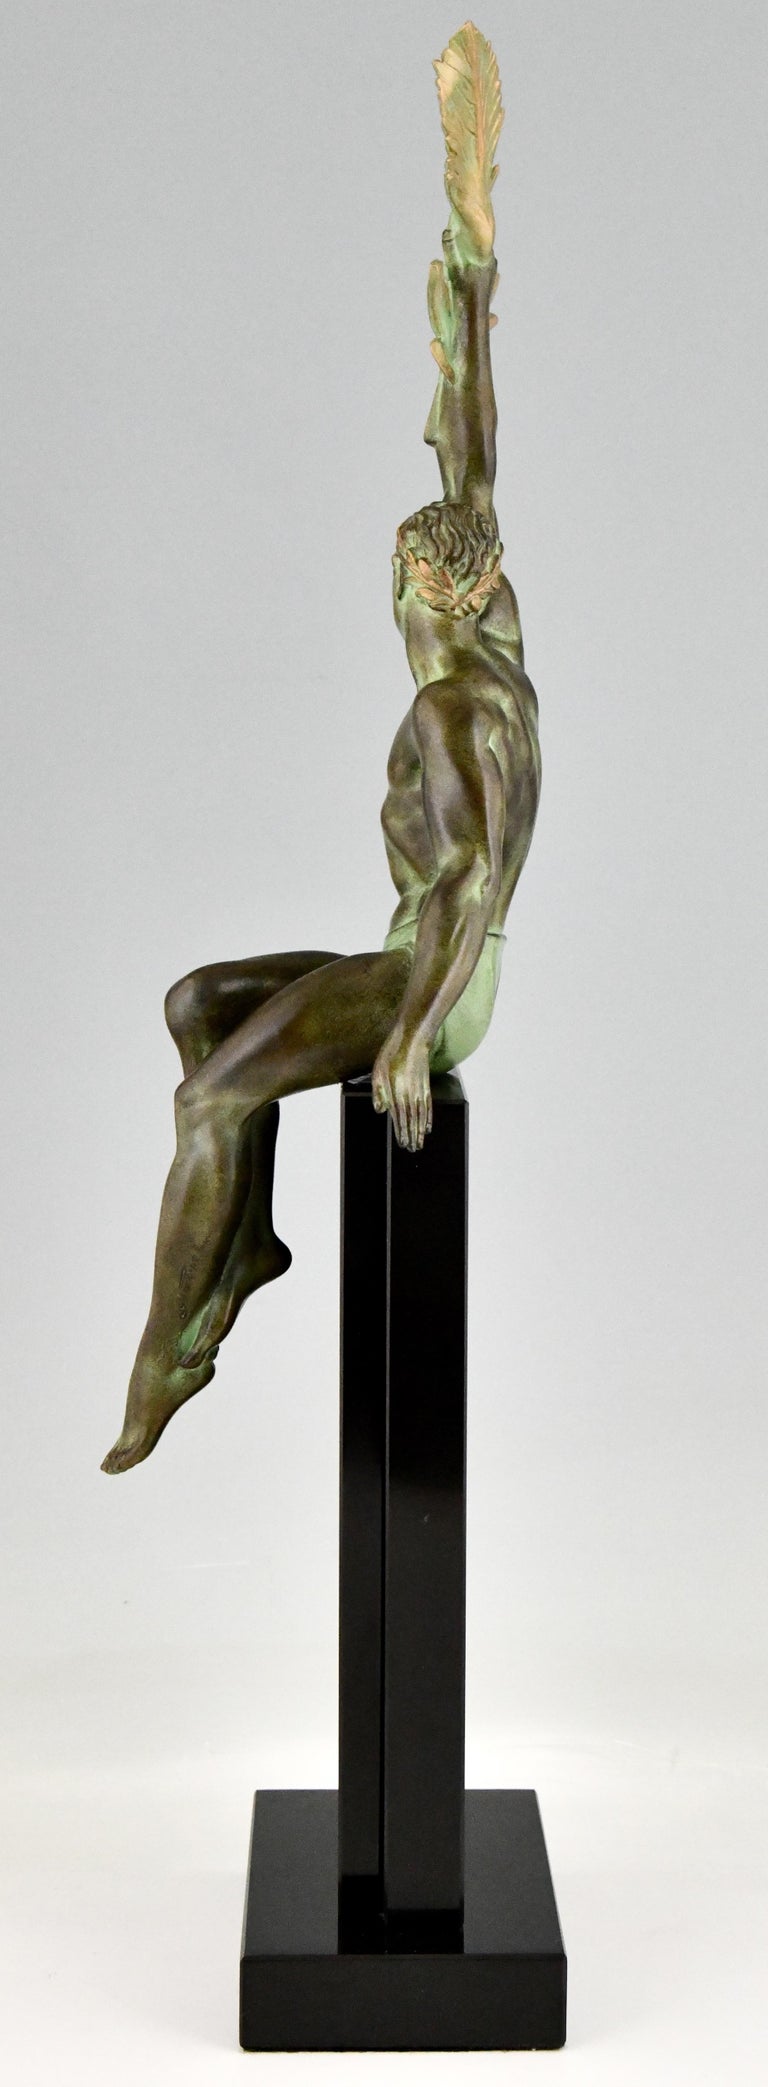 Metal Art Deco Style Sculpture Athlete with Palm Leaf by Max Le Verrier, Victory For Sale